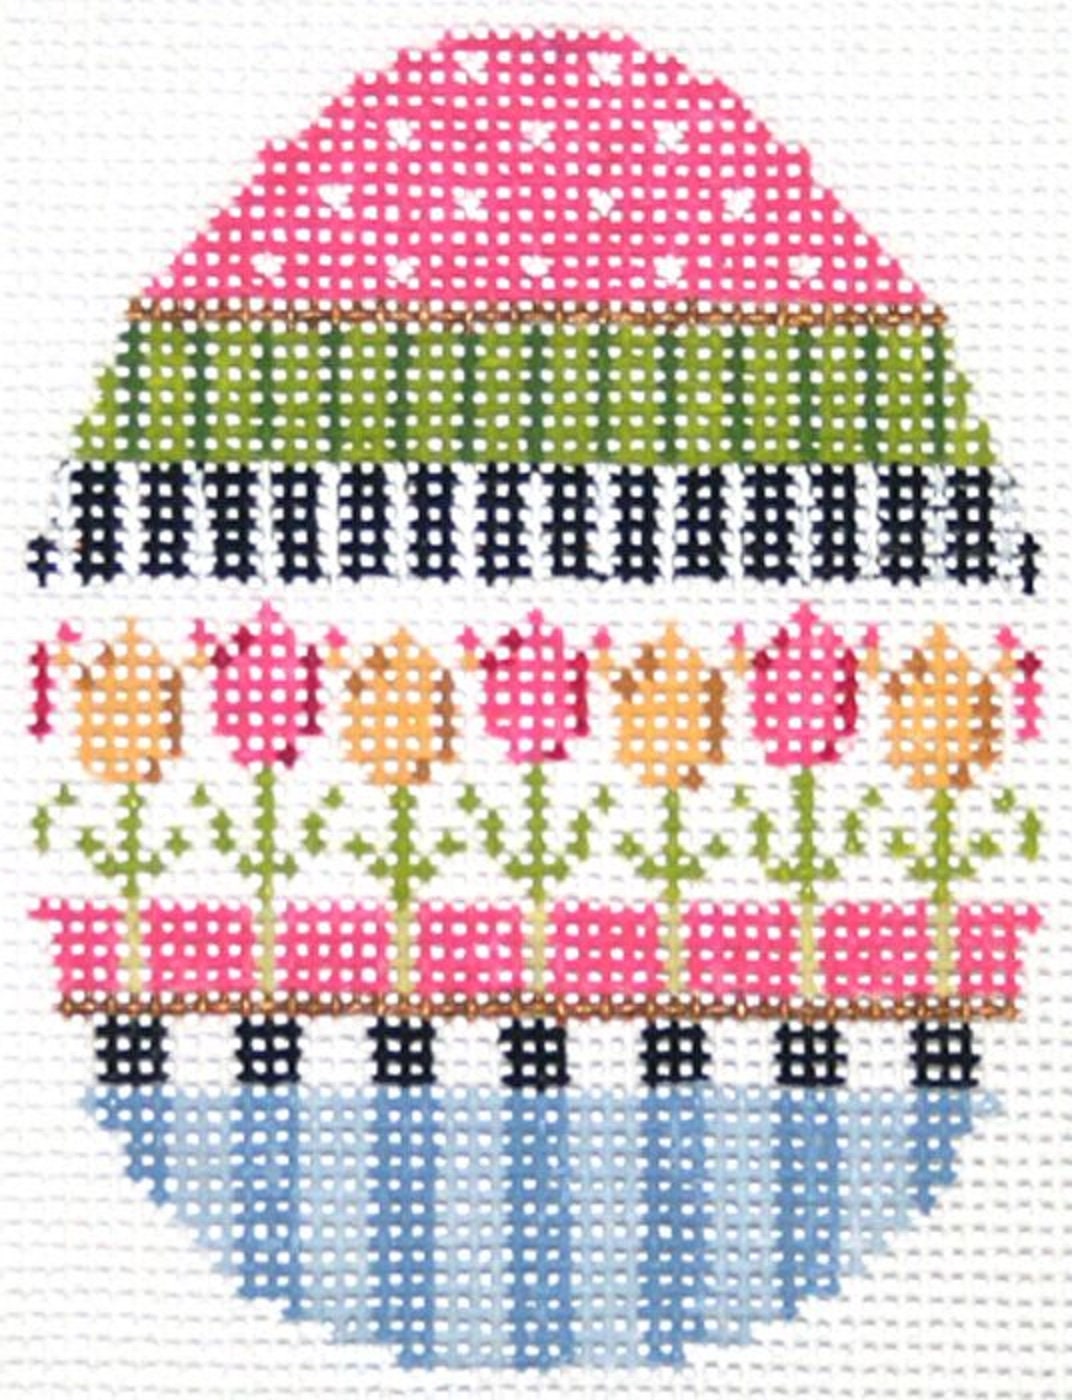 Needlepoint Handpainted Kelly Clark Easter Egg Tulip Patterned 3x3 -Free Us Shipping